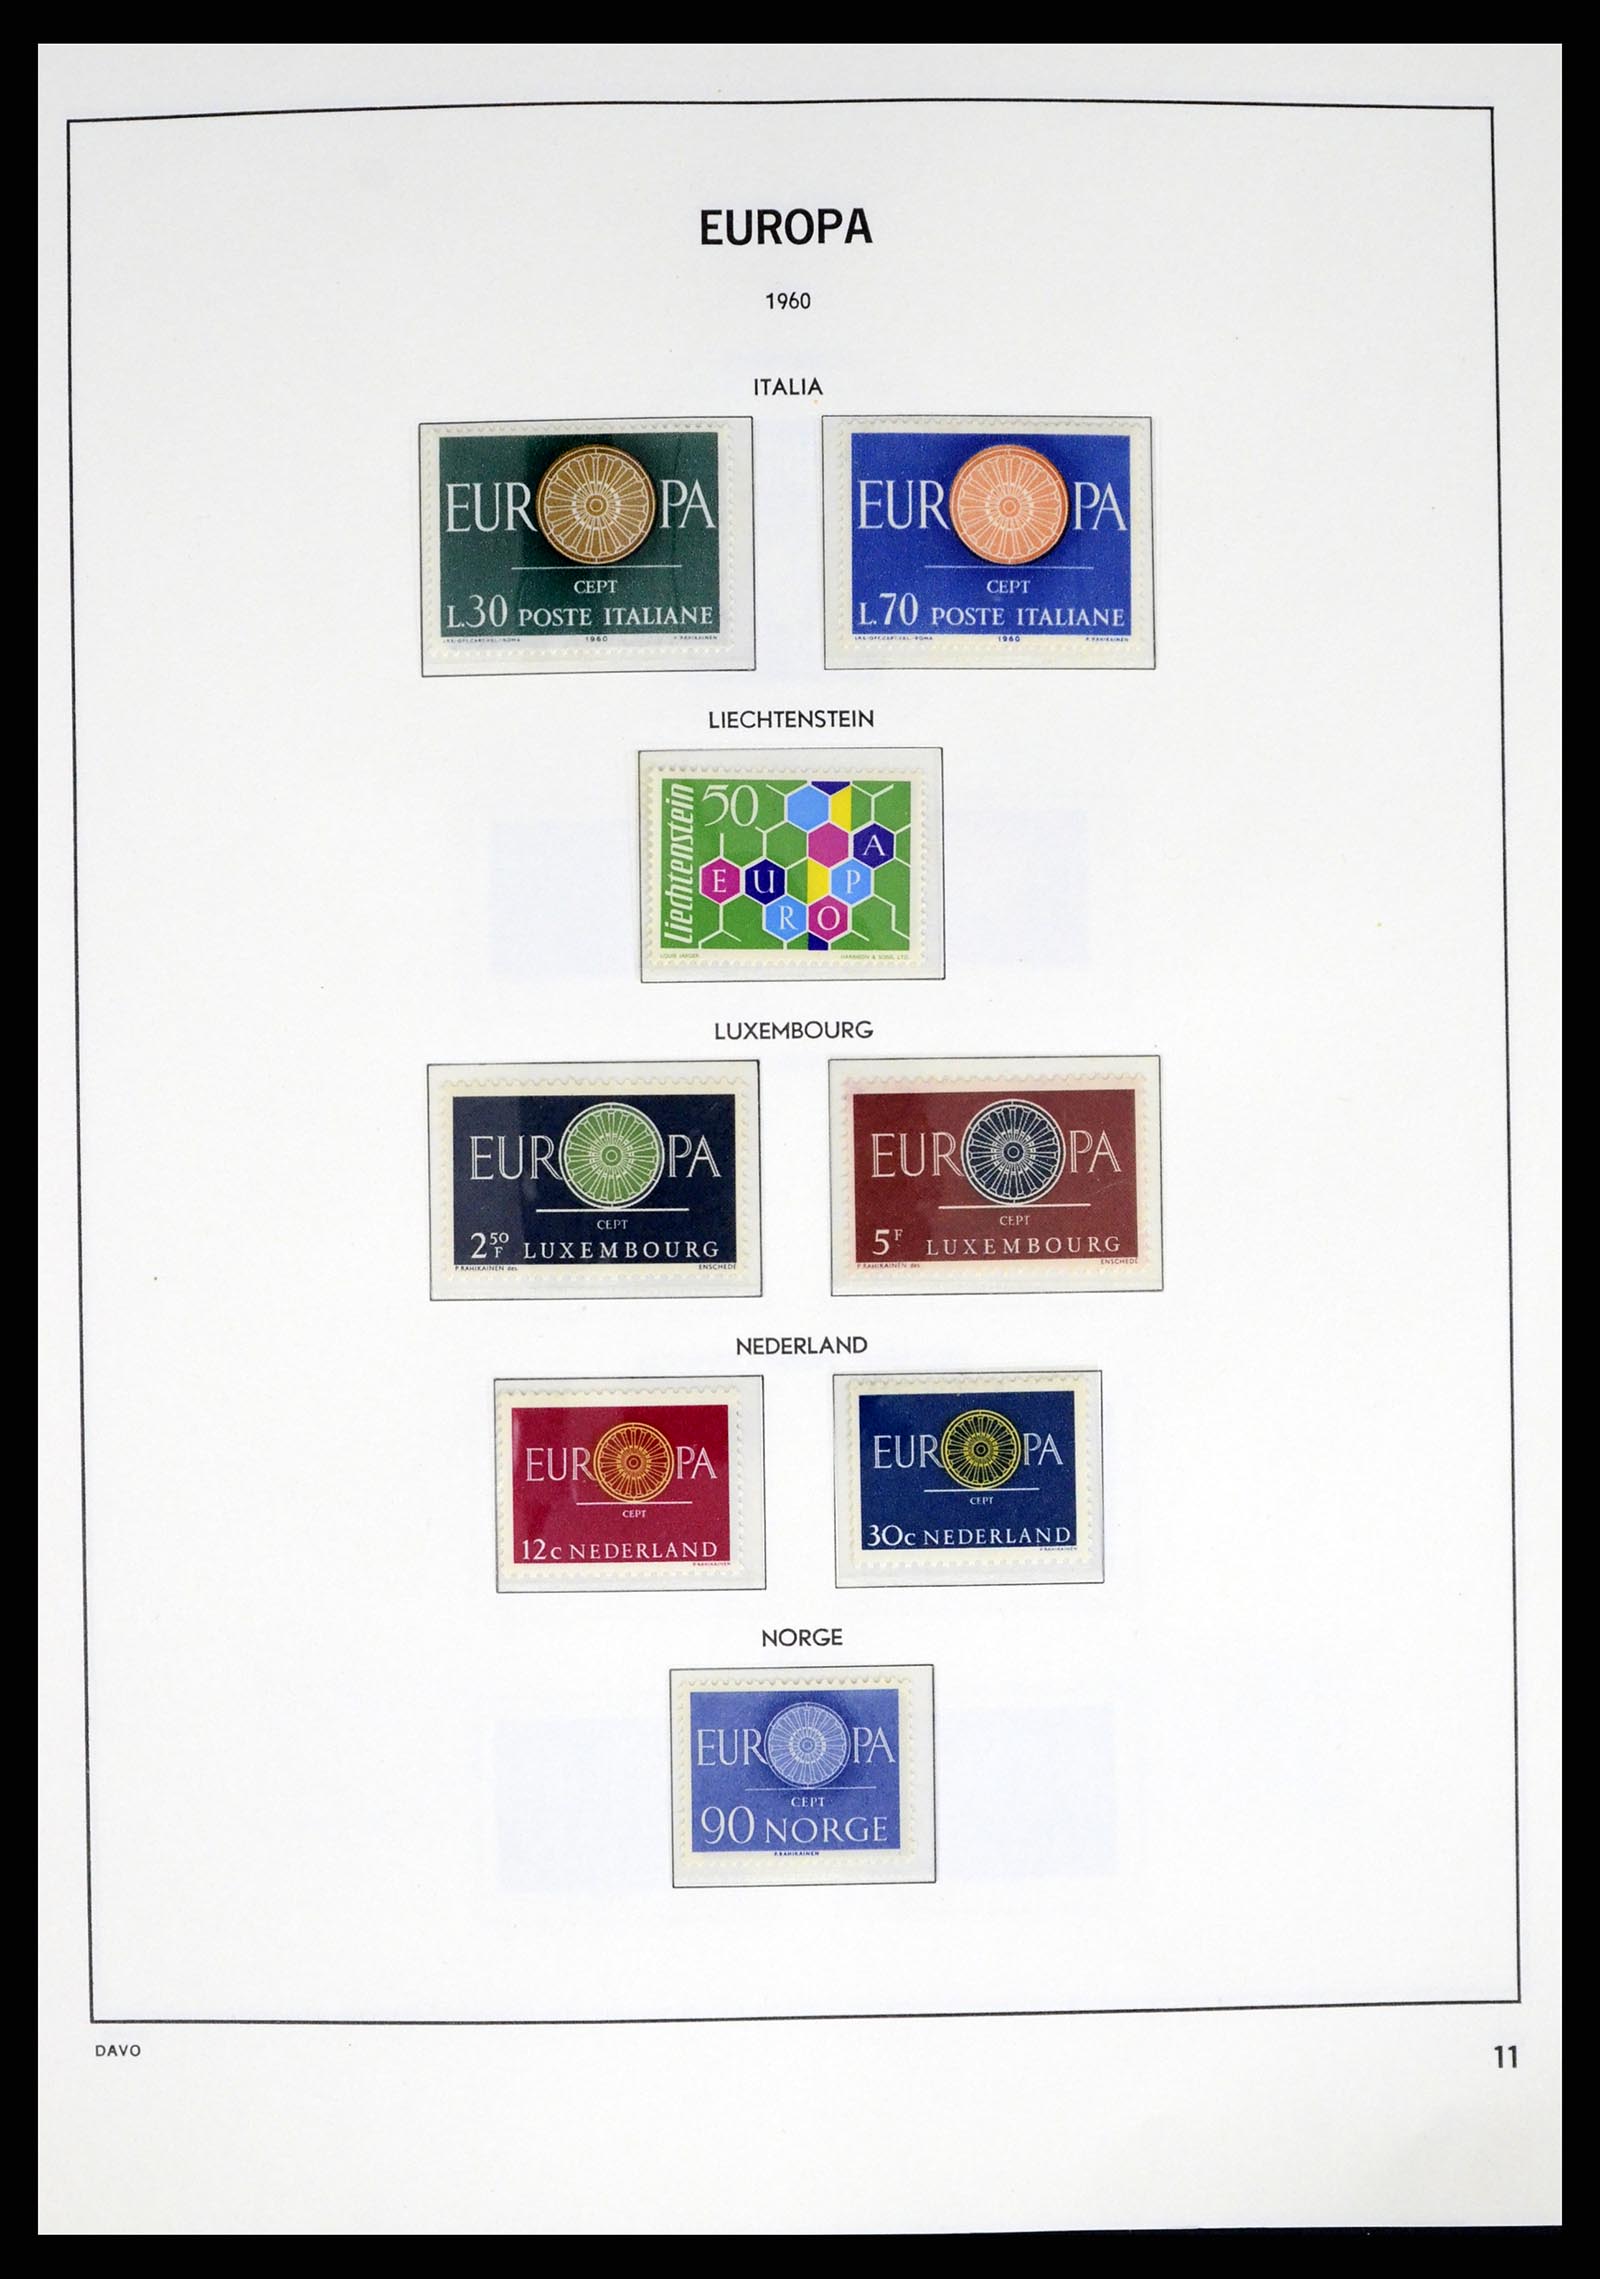 37325 011 - Stamp collection 37325 Europa CEPT 1956-20011.